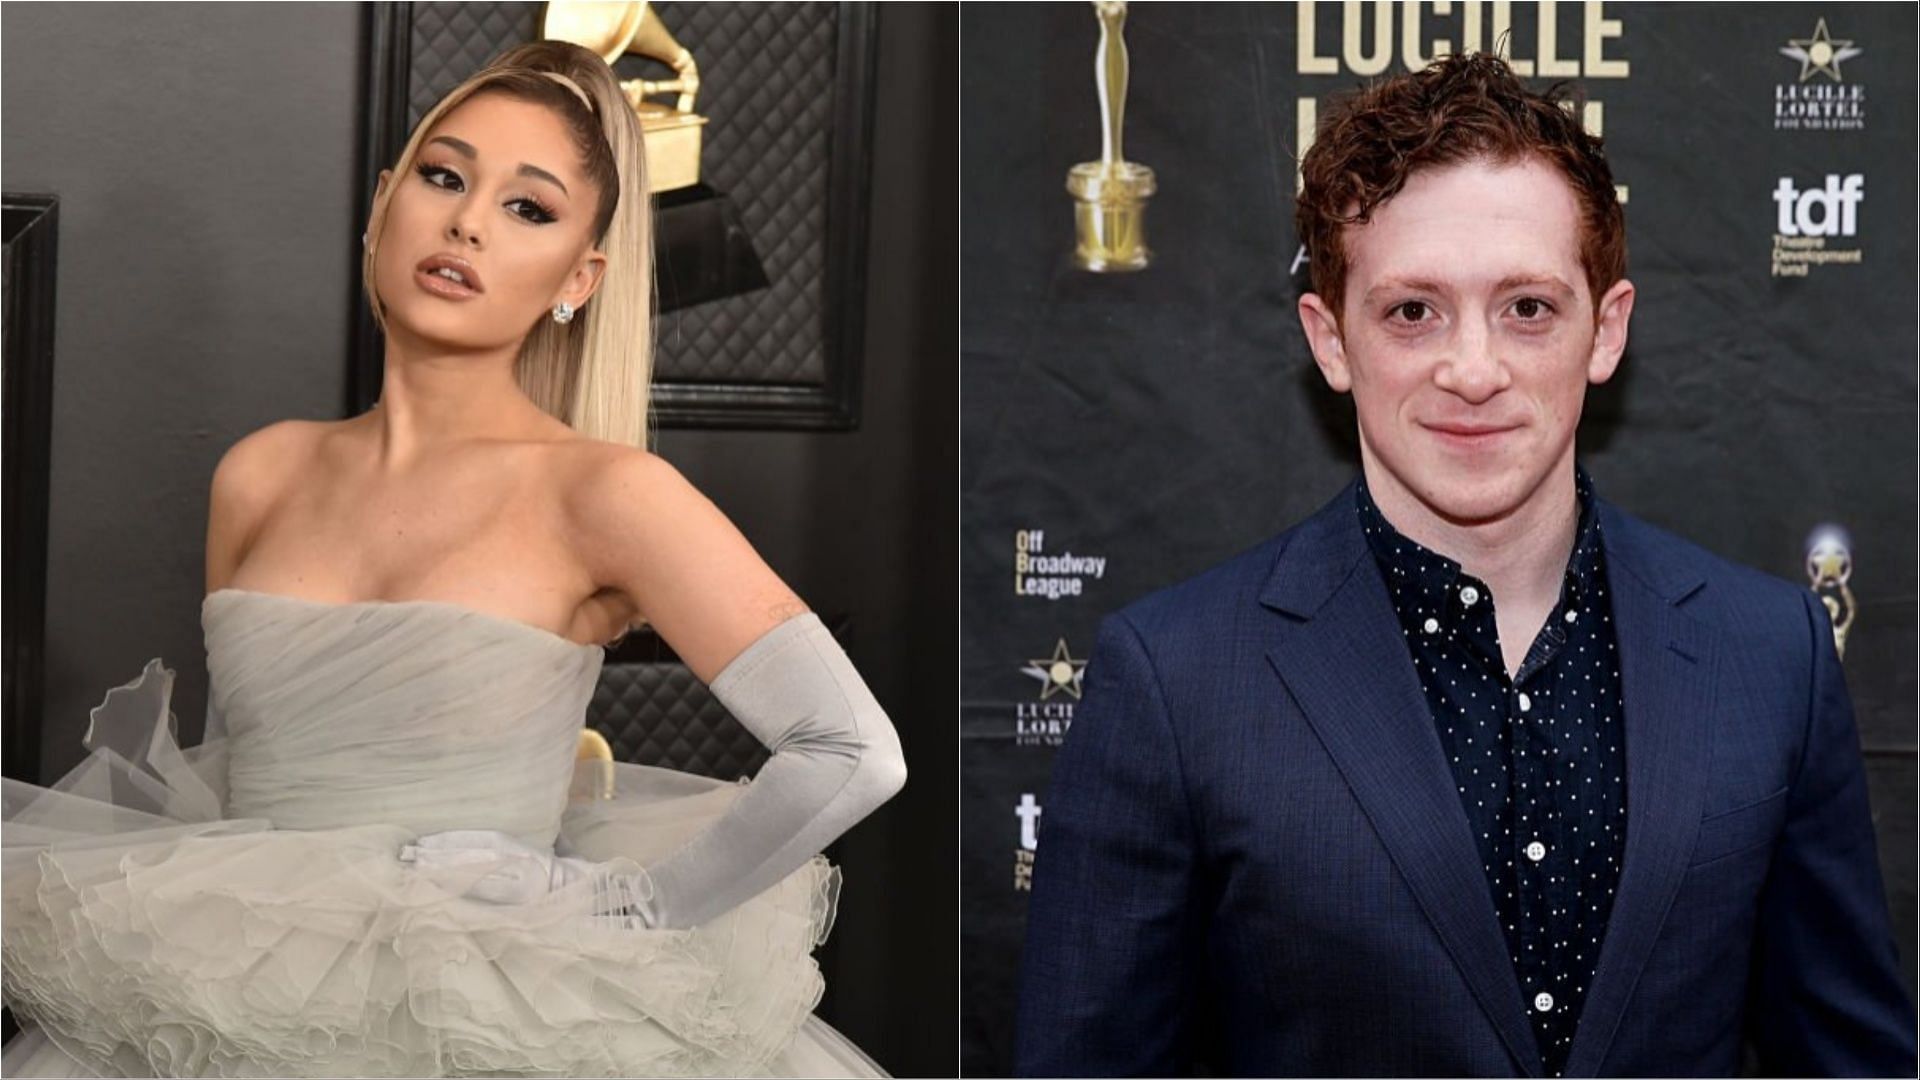 Ethan Slater and Ariana Grande would appear together in the film adaptation of Wicked (Images via David Crotty and Dominik Bindl/Getty Images)